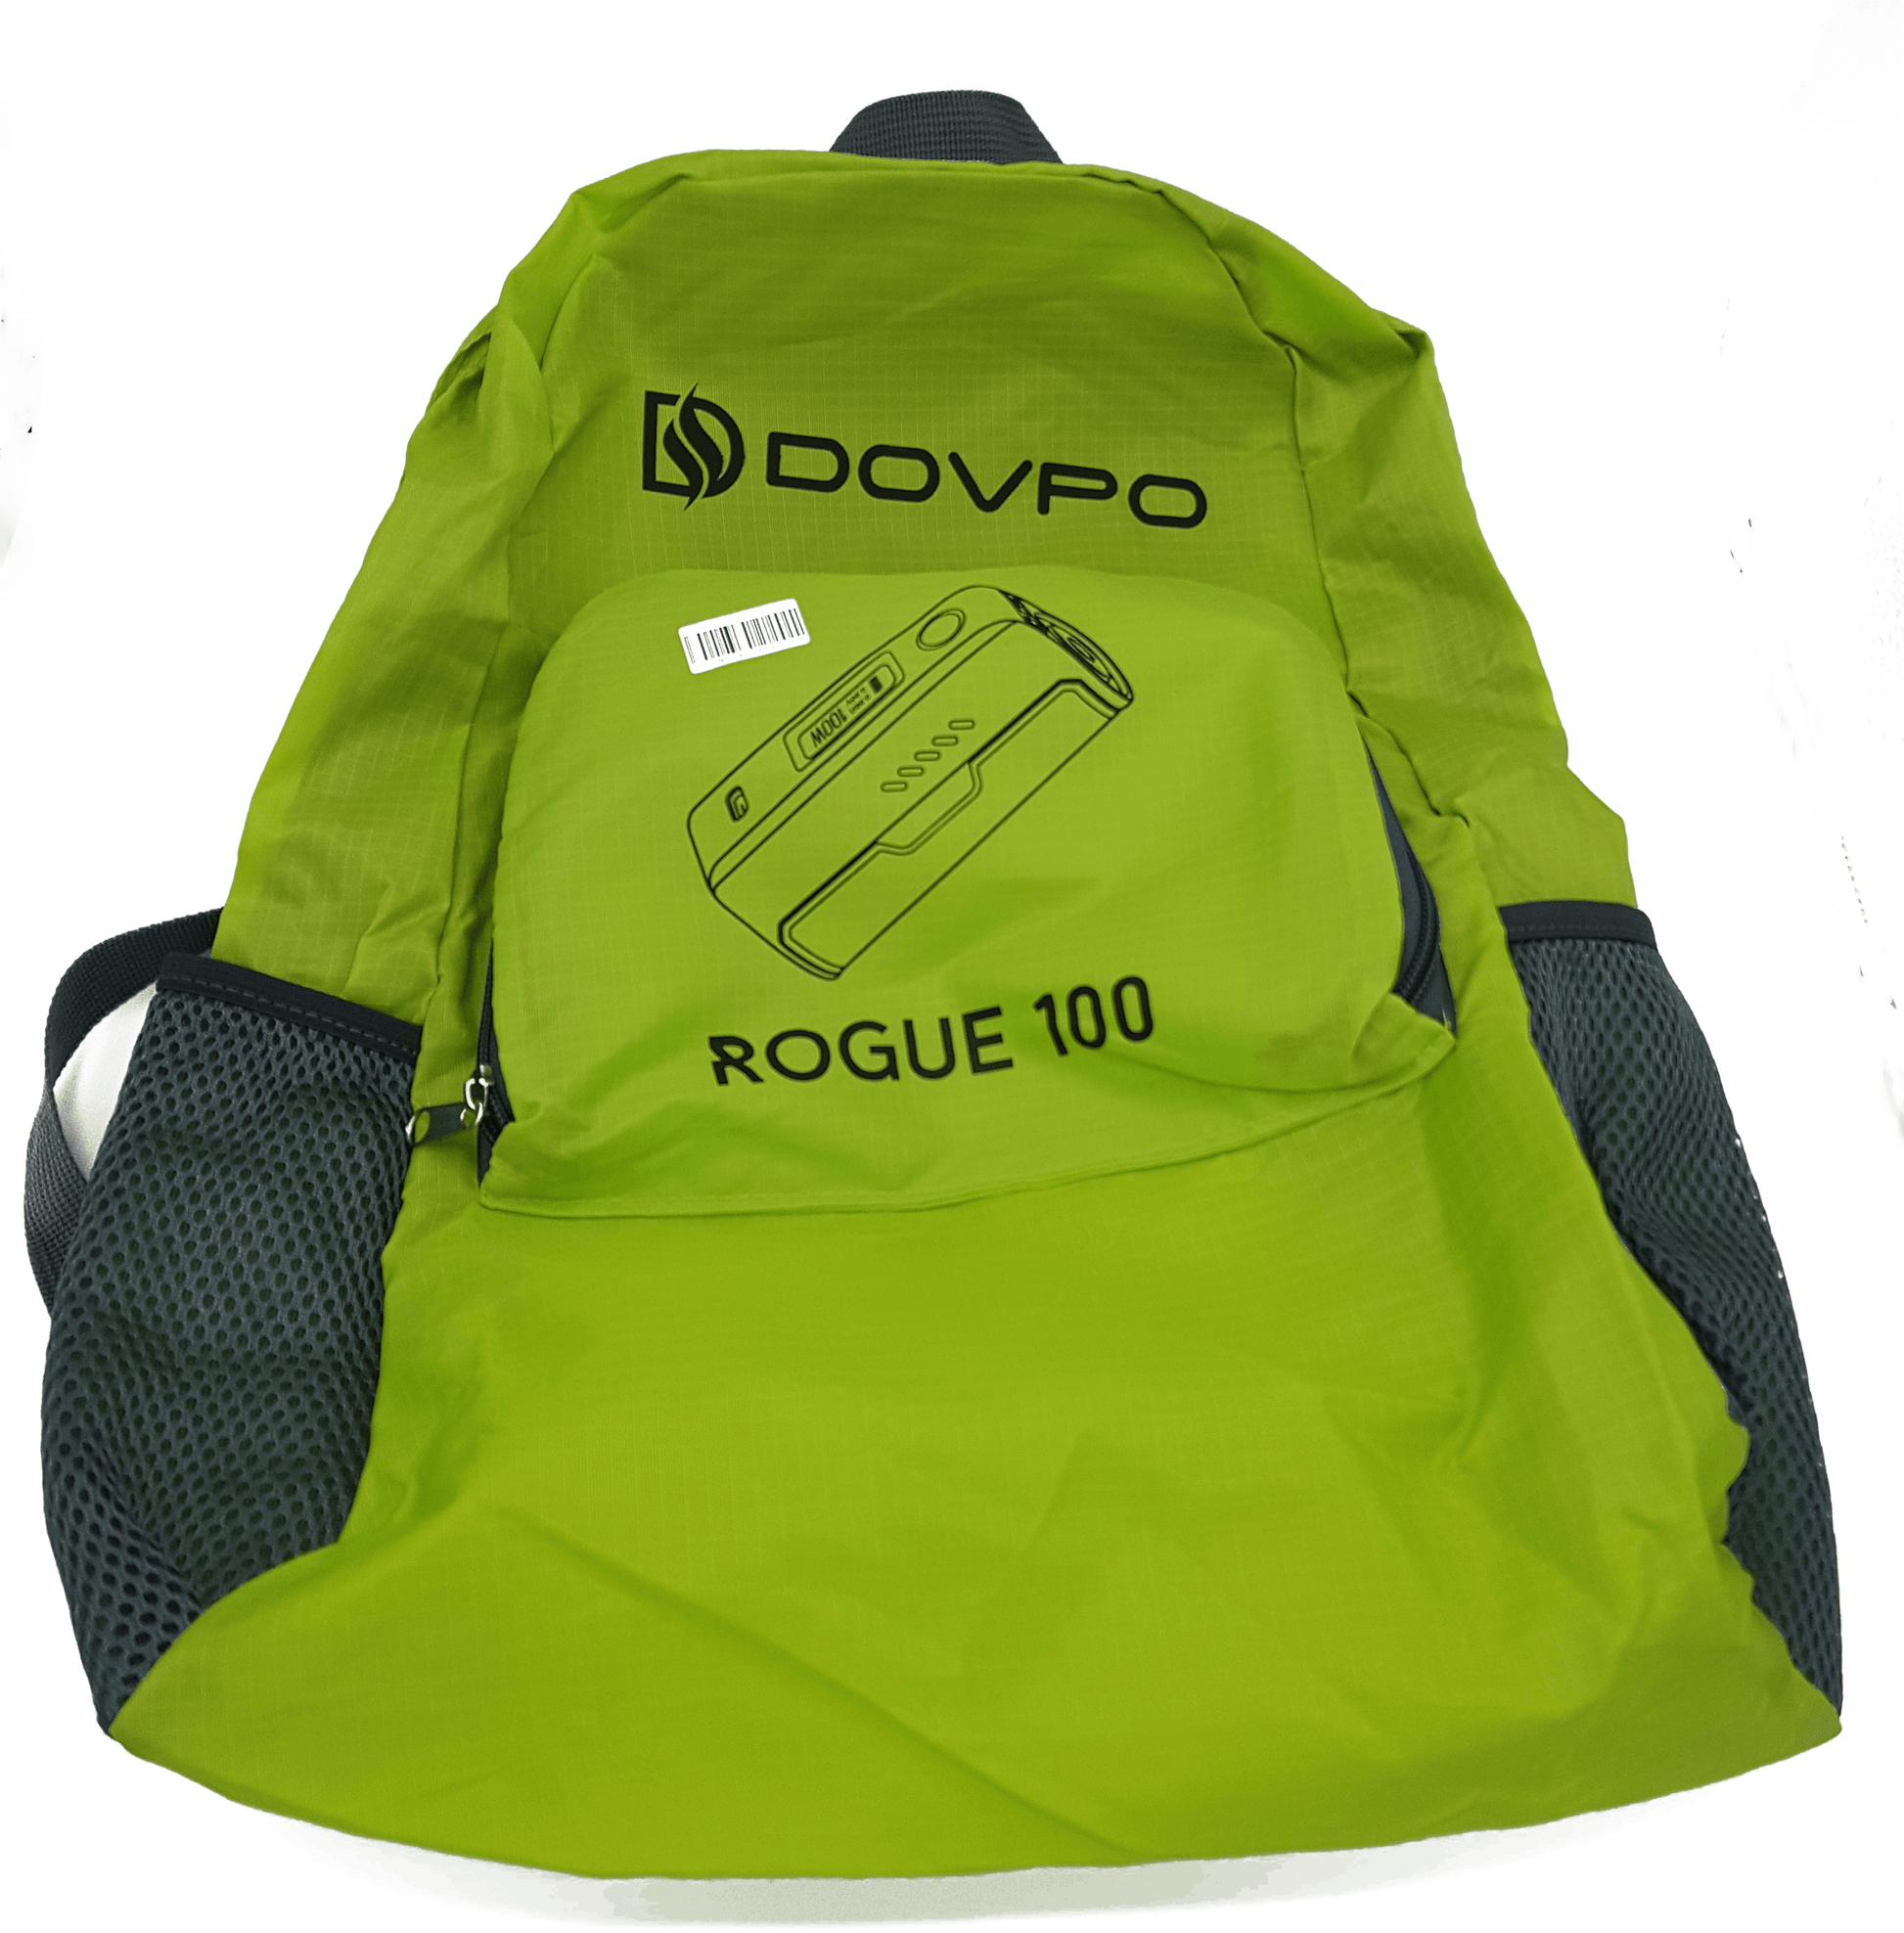 DOVPO ROGUE 100 BACKPACK - Vaper Aid